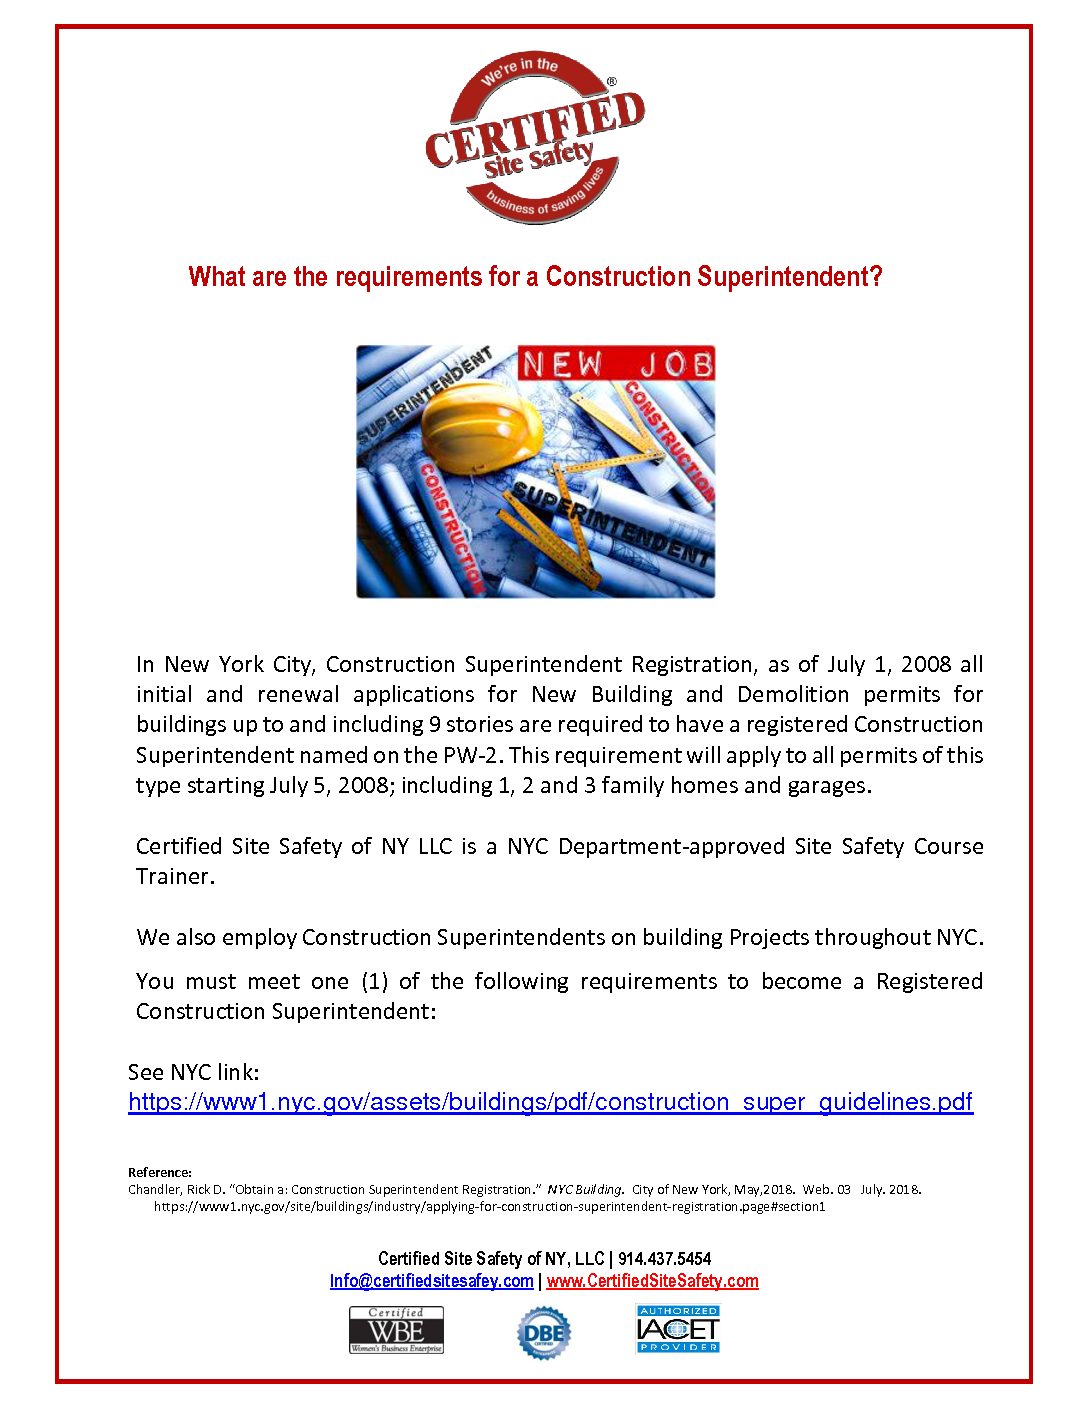 What Are The Requirements For A Construction Superintendent Certified Site Safety